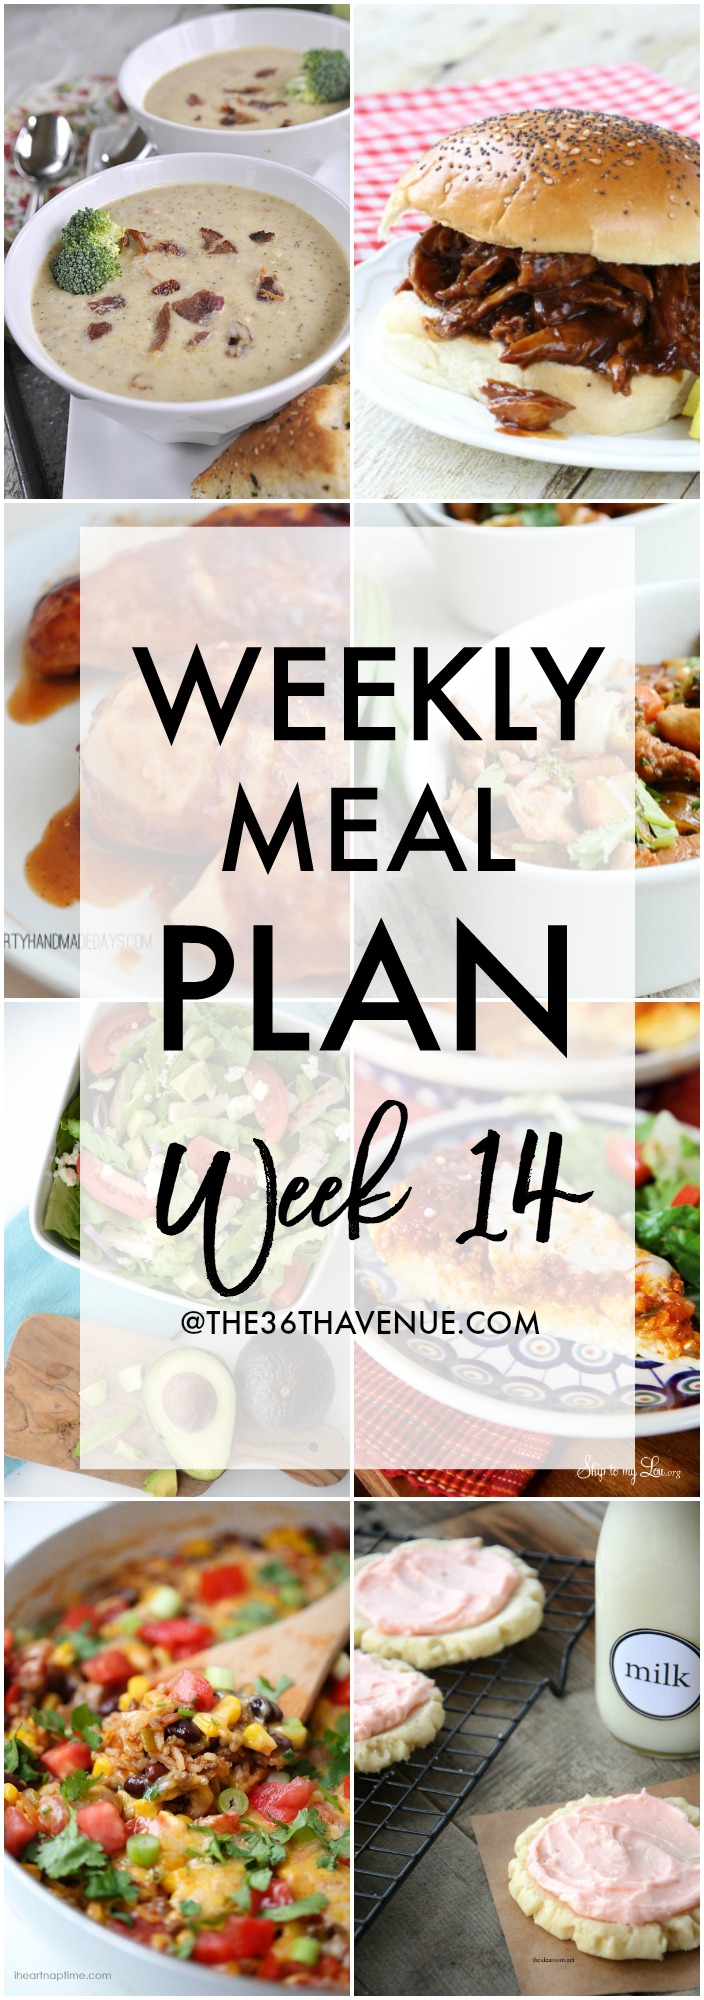 Weekly Meal Plan 14 - Delicious main dish recipes and dessert for each day of the week!